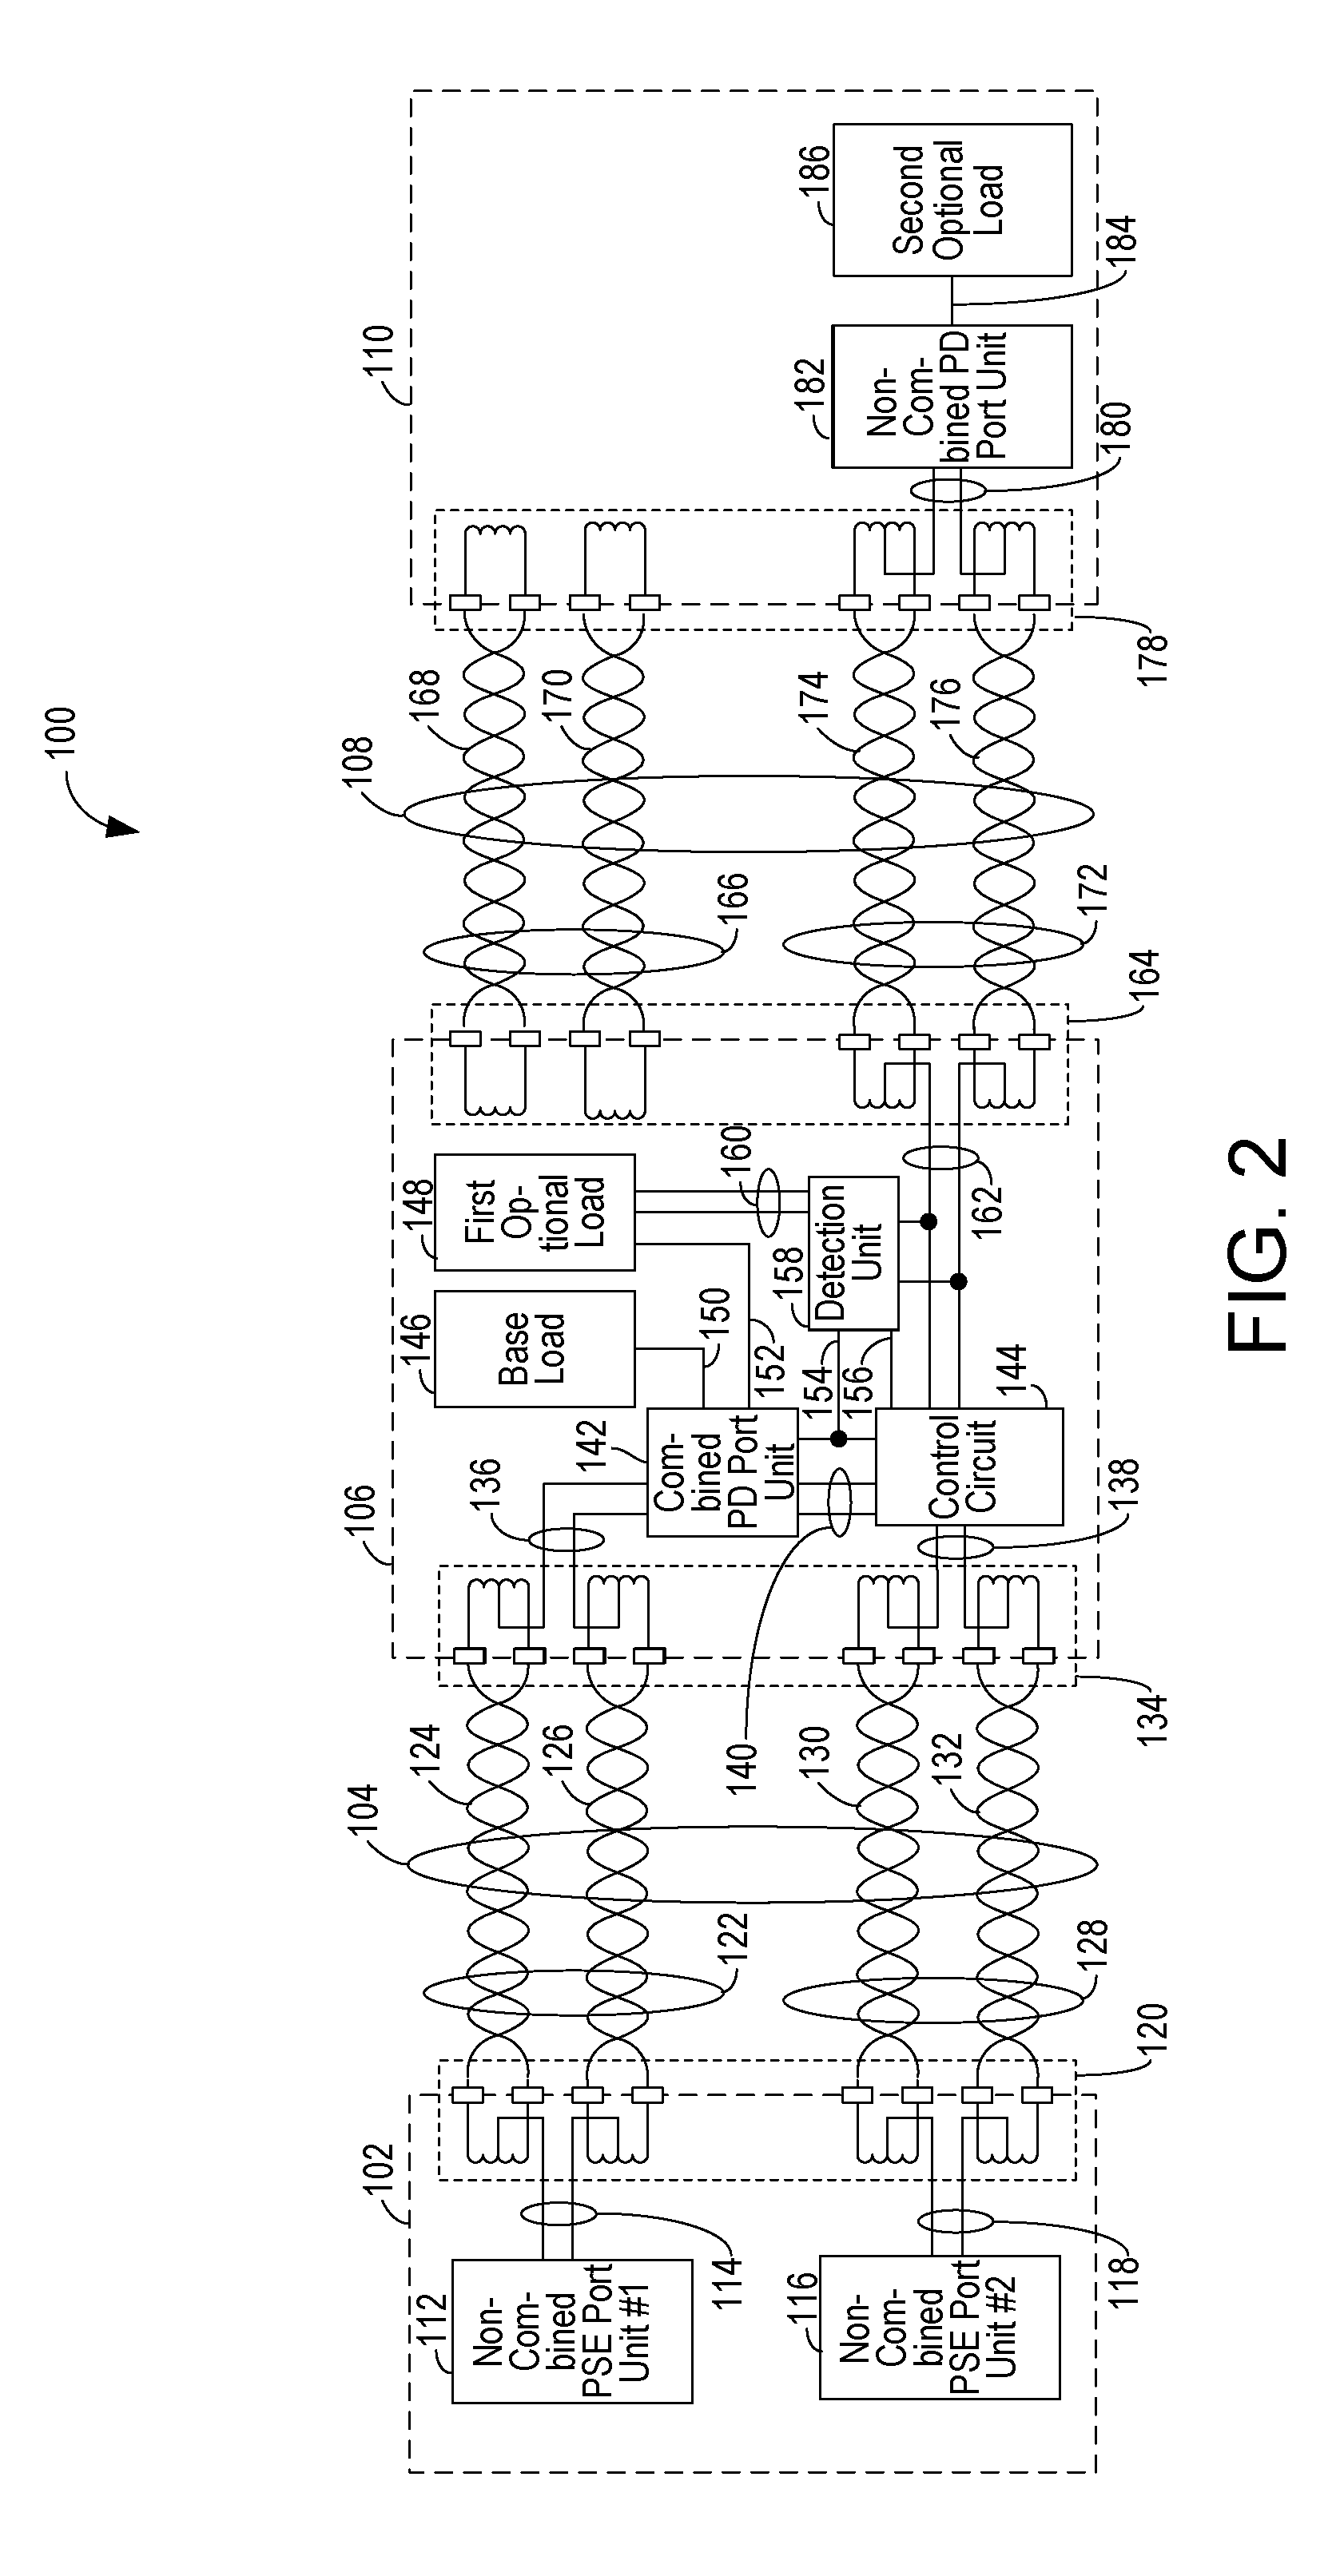 Method and apparatus for distributing power over communication cabling